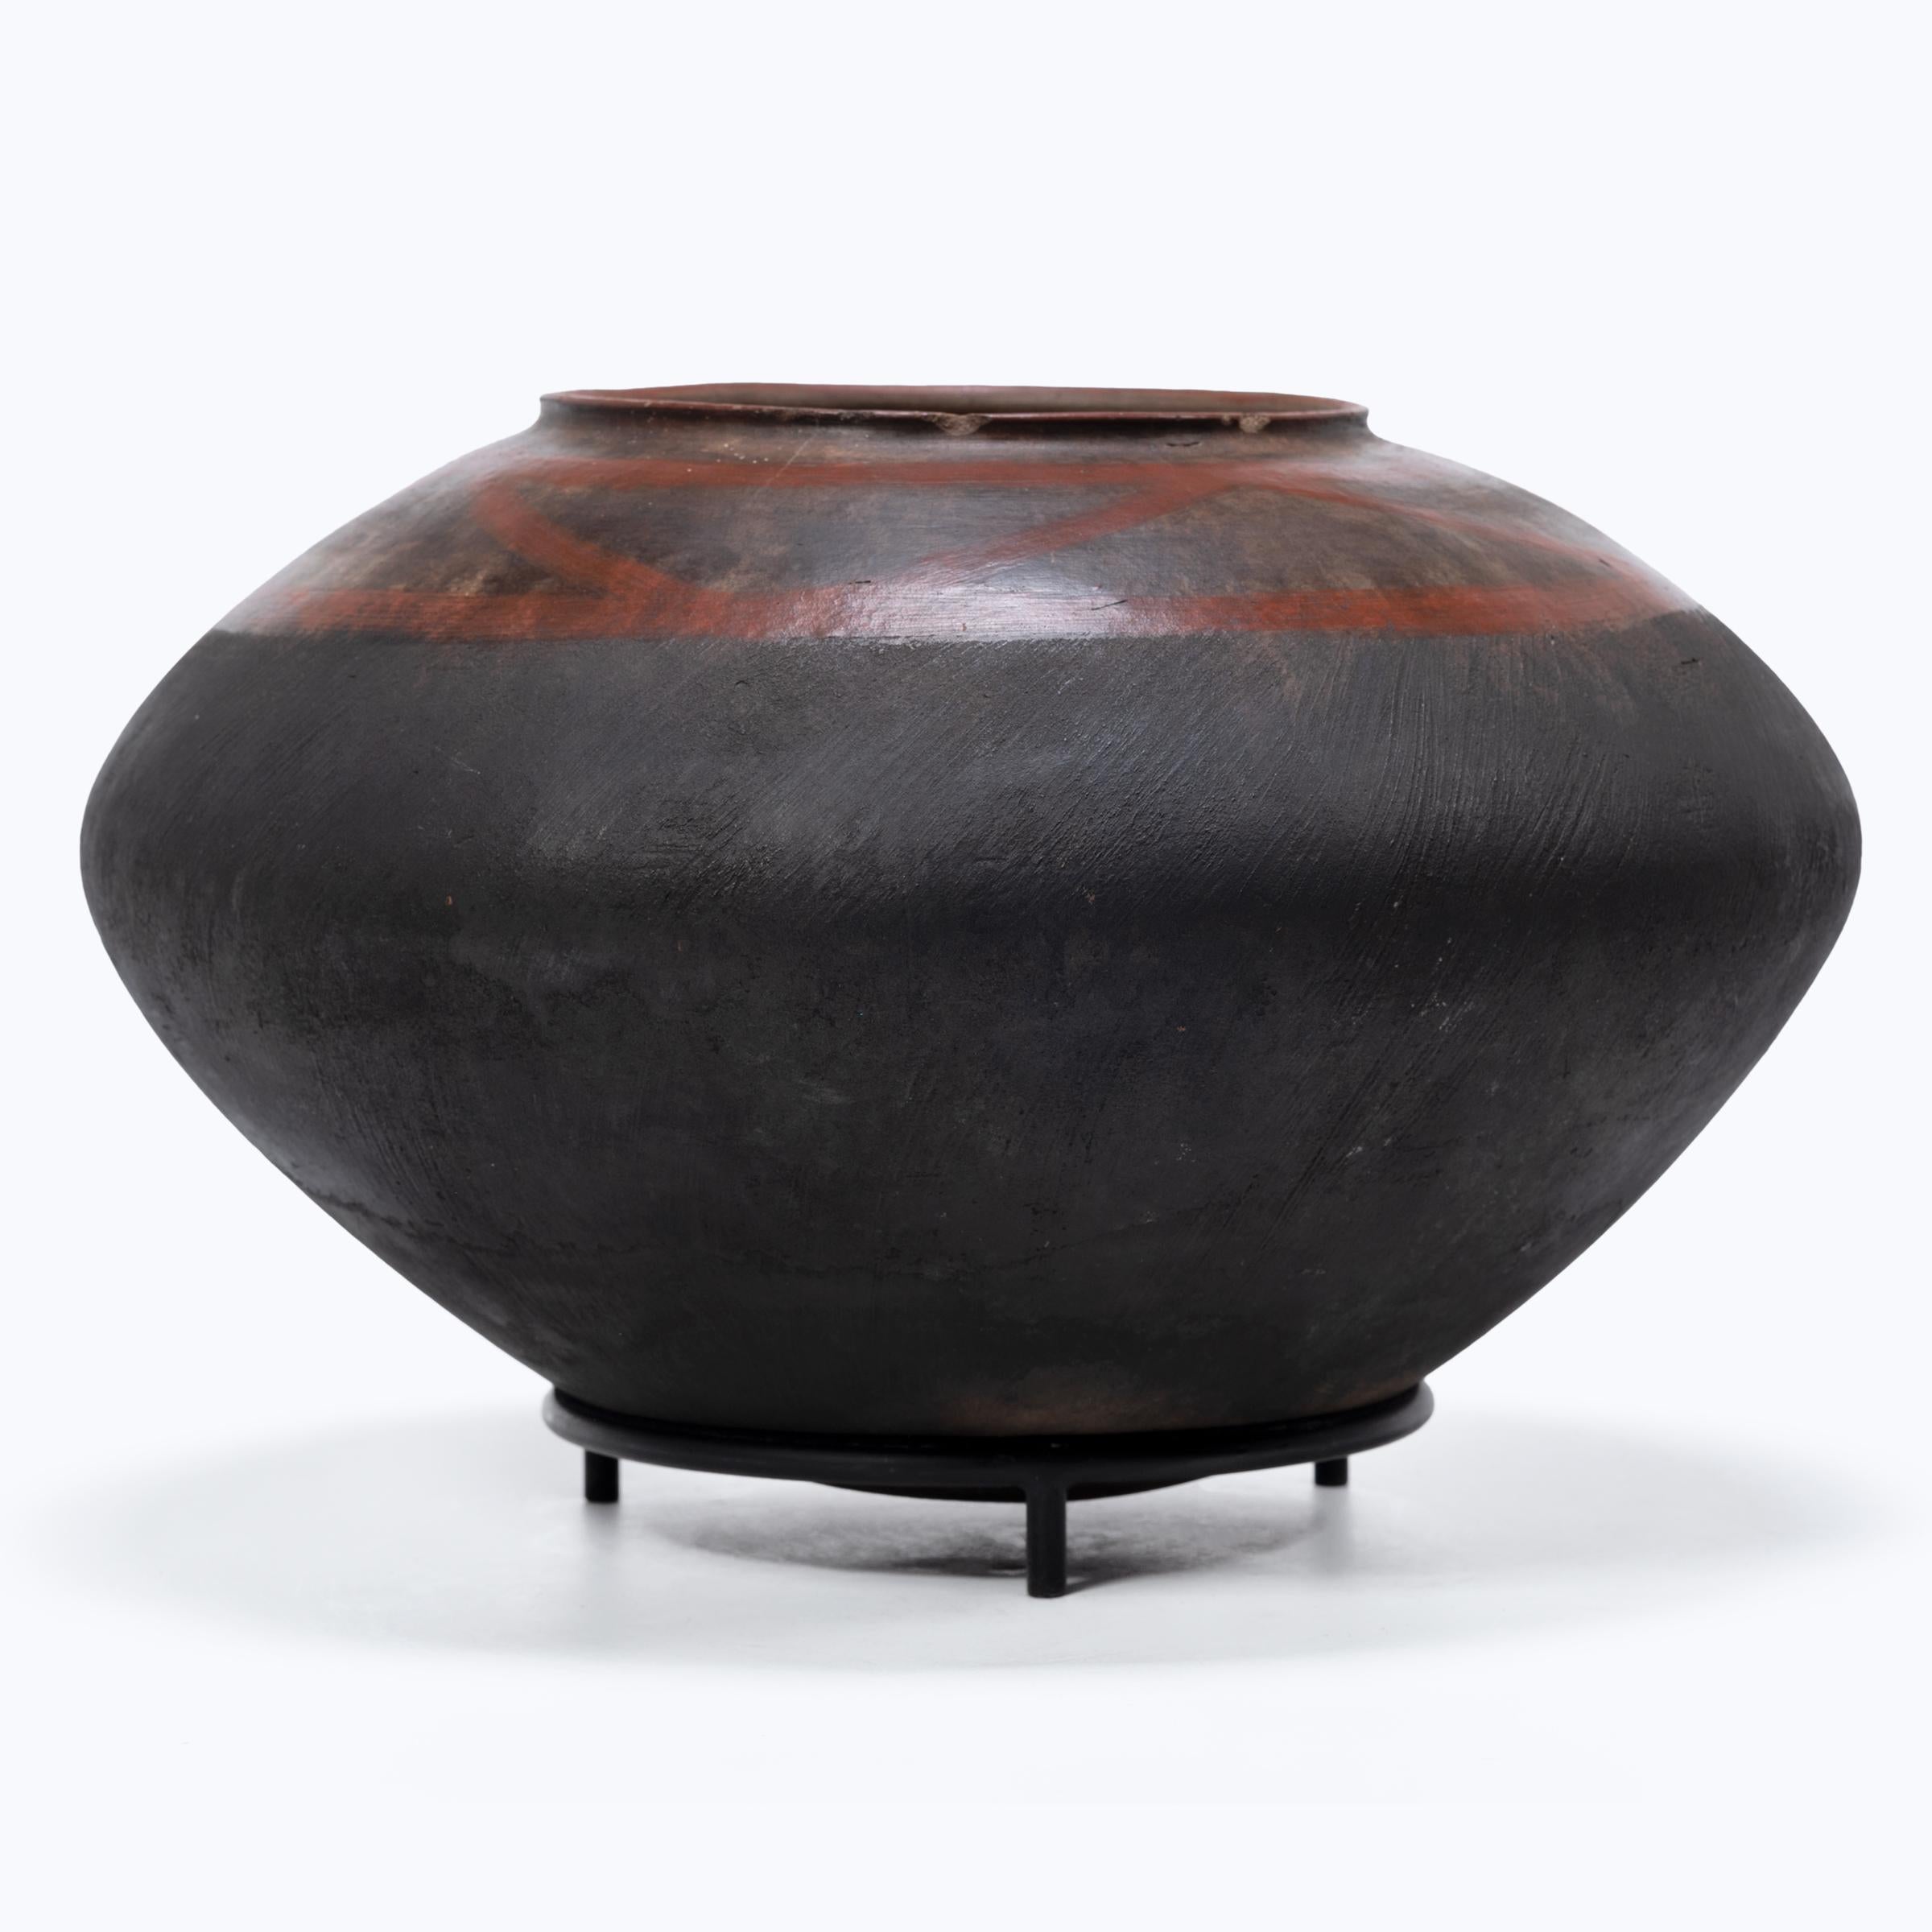 This balanced terracotta pot was used as a storage container by the Nyakyusa people of Tanzania. Bands of red slip pattern the upper portion of the squat vessel, connected by gracefully arched diagonal lines. The lower half is darkened from the